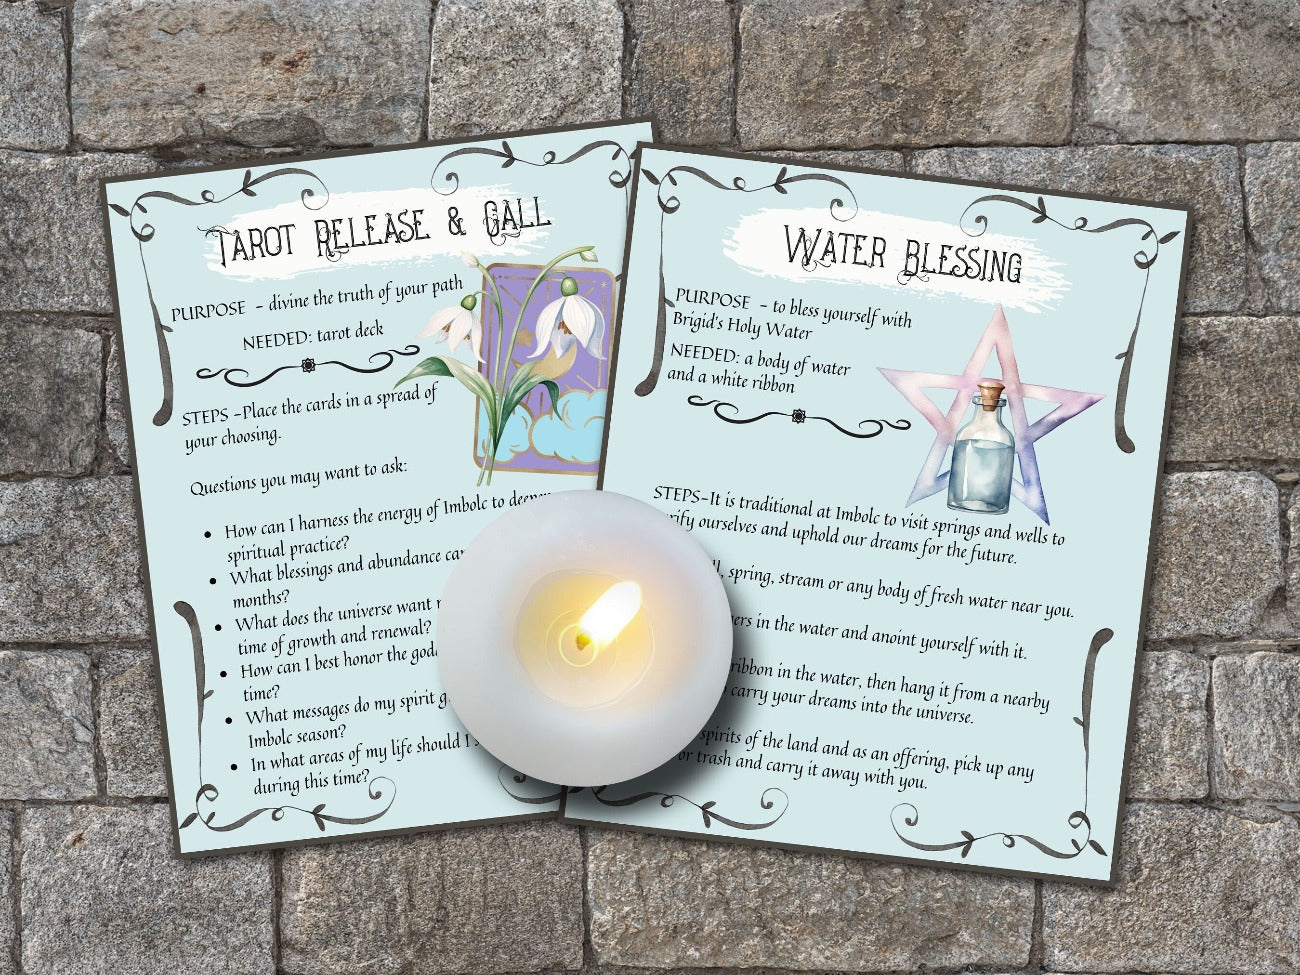 IMBOLC SPELL CARDS, Tarot Release and Water Blessing Cards - Morgana Magick Spell